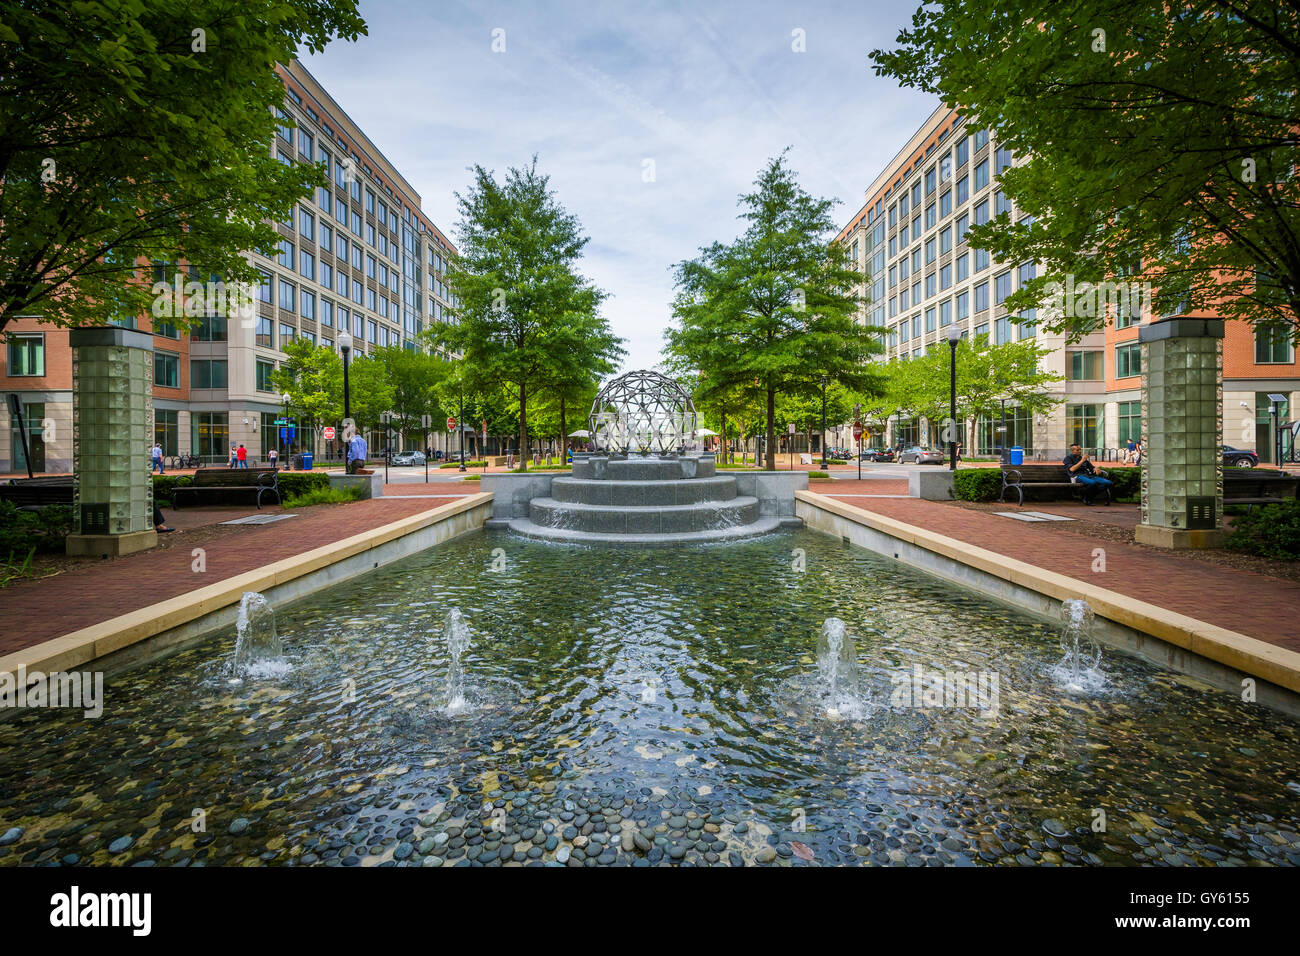 Fountains and buildings in Alexandria, Virginia. Stock Photo